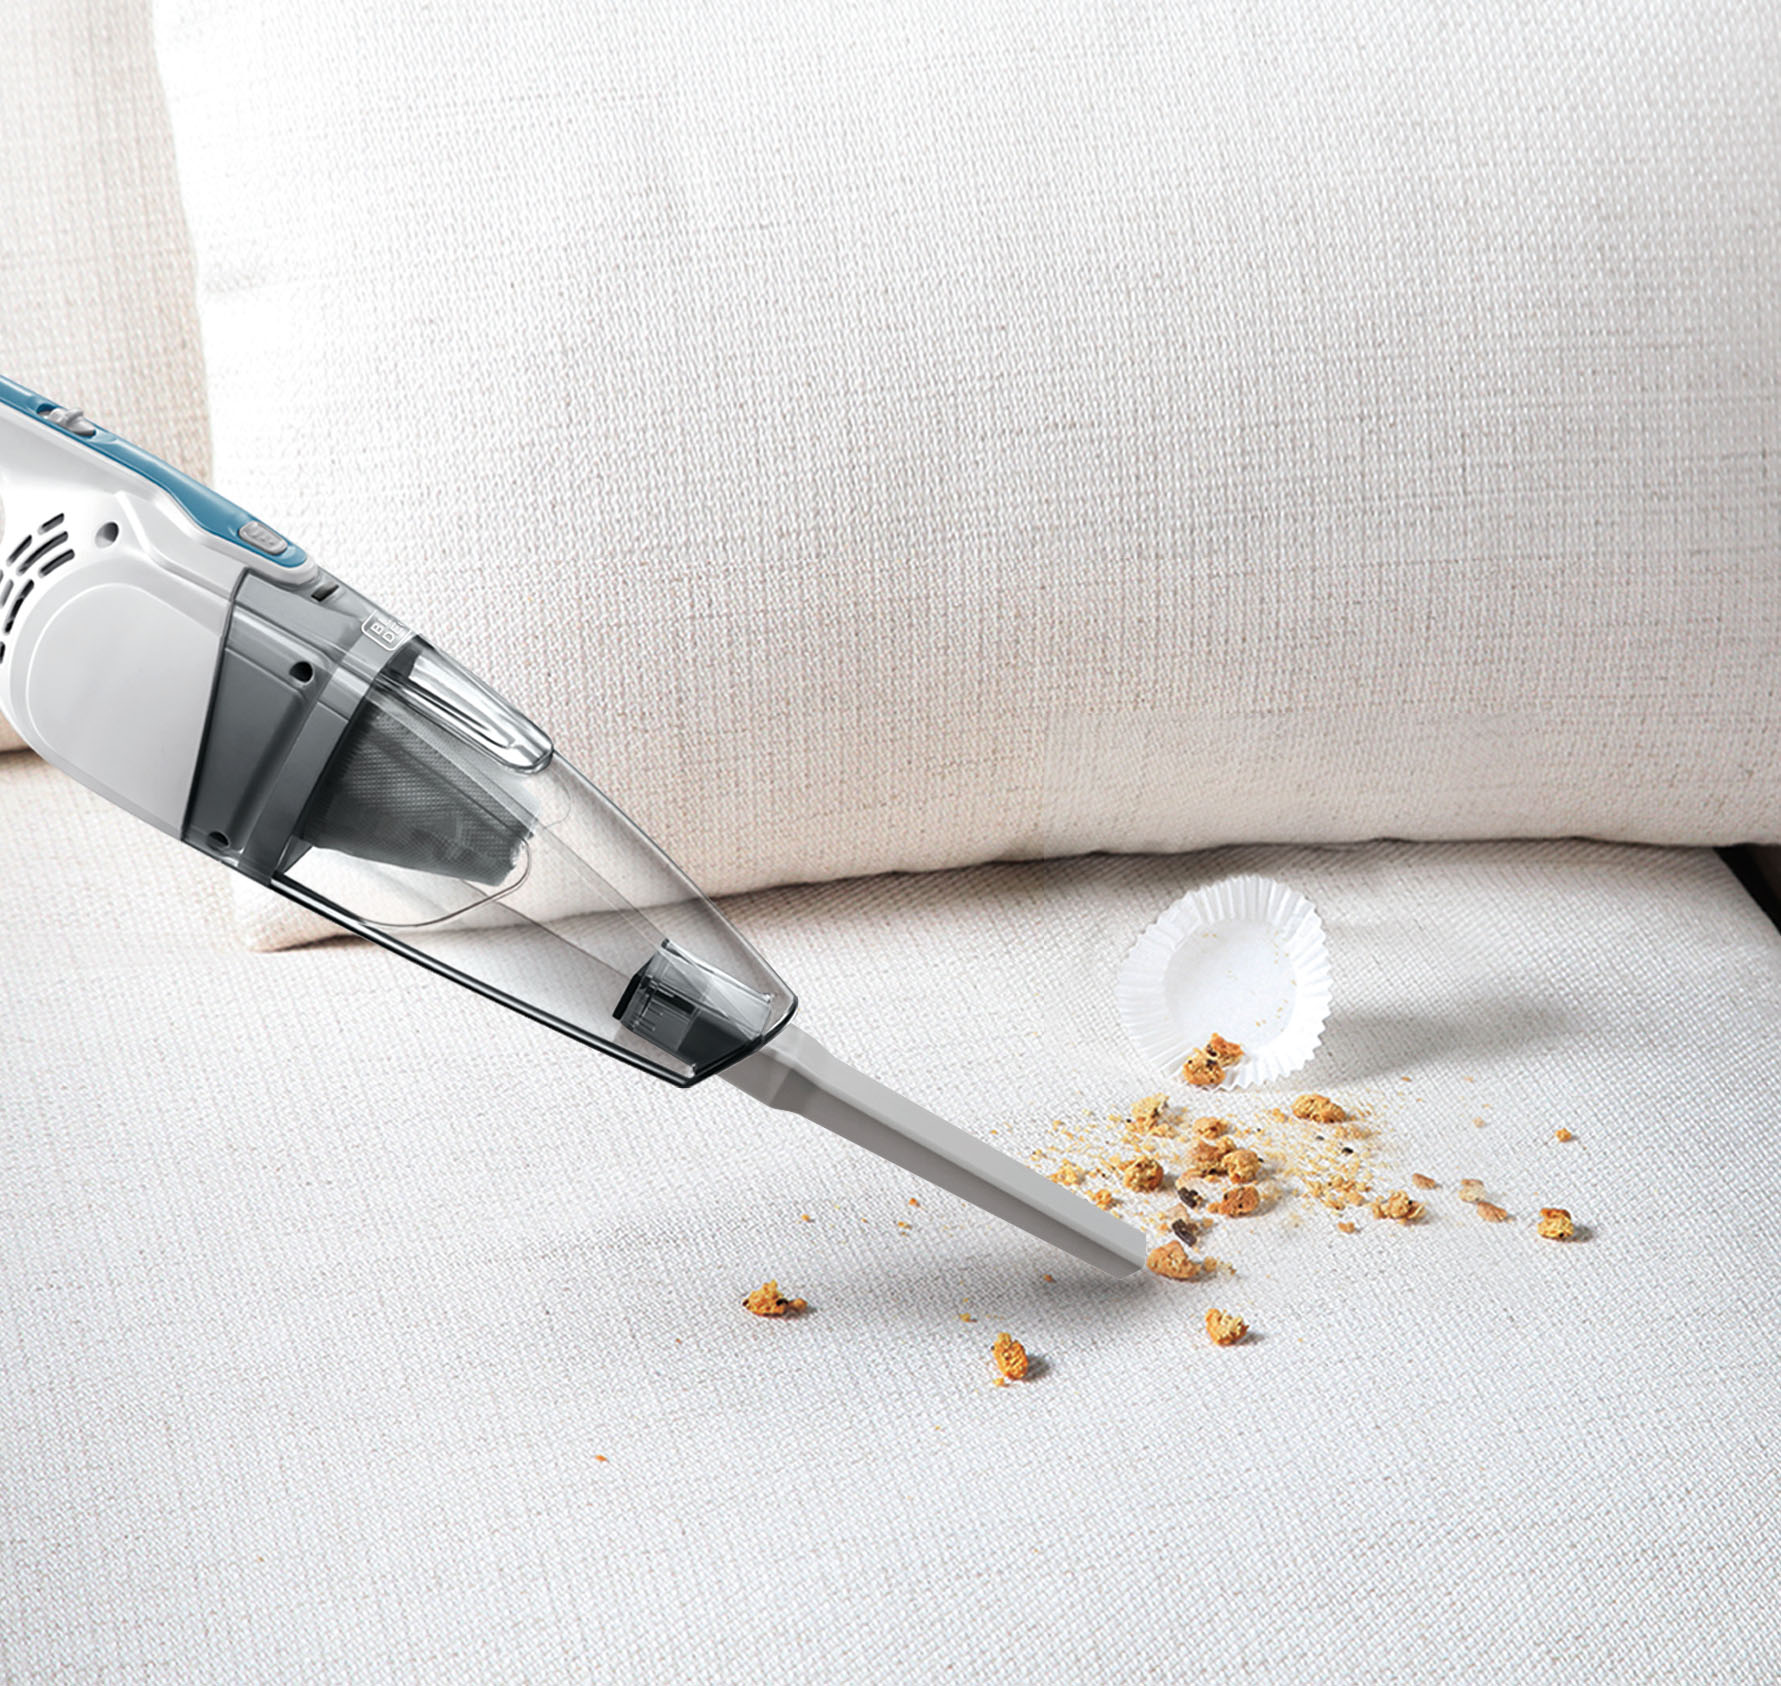 Black and Decker 3-in-1 Lightweight Corded Stick Vacuum - image 6 of 9